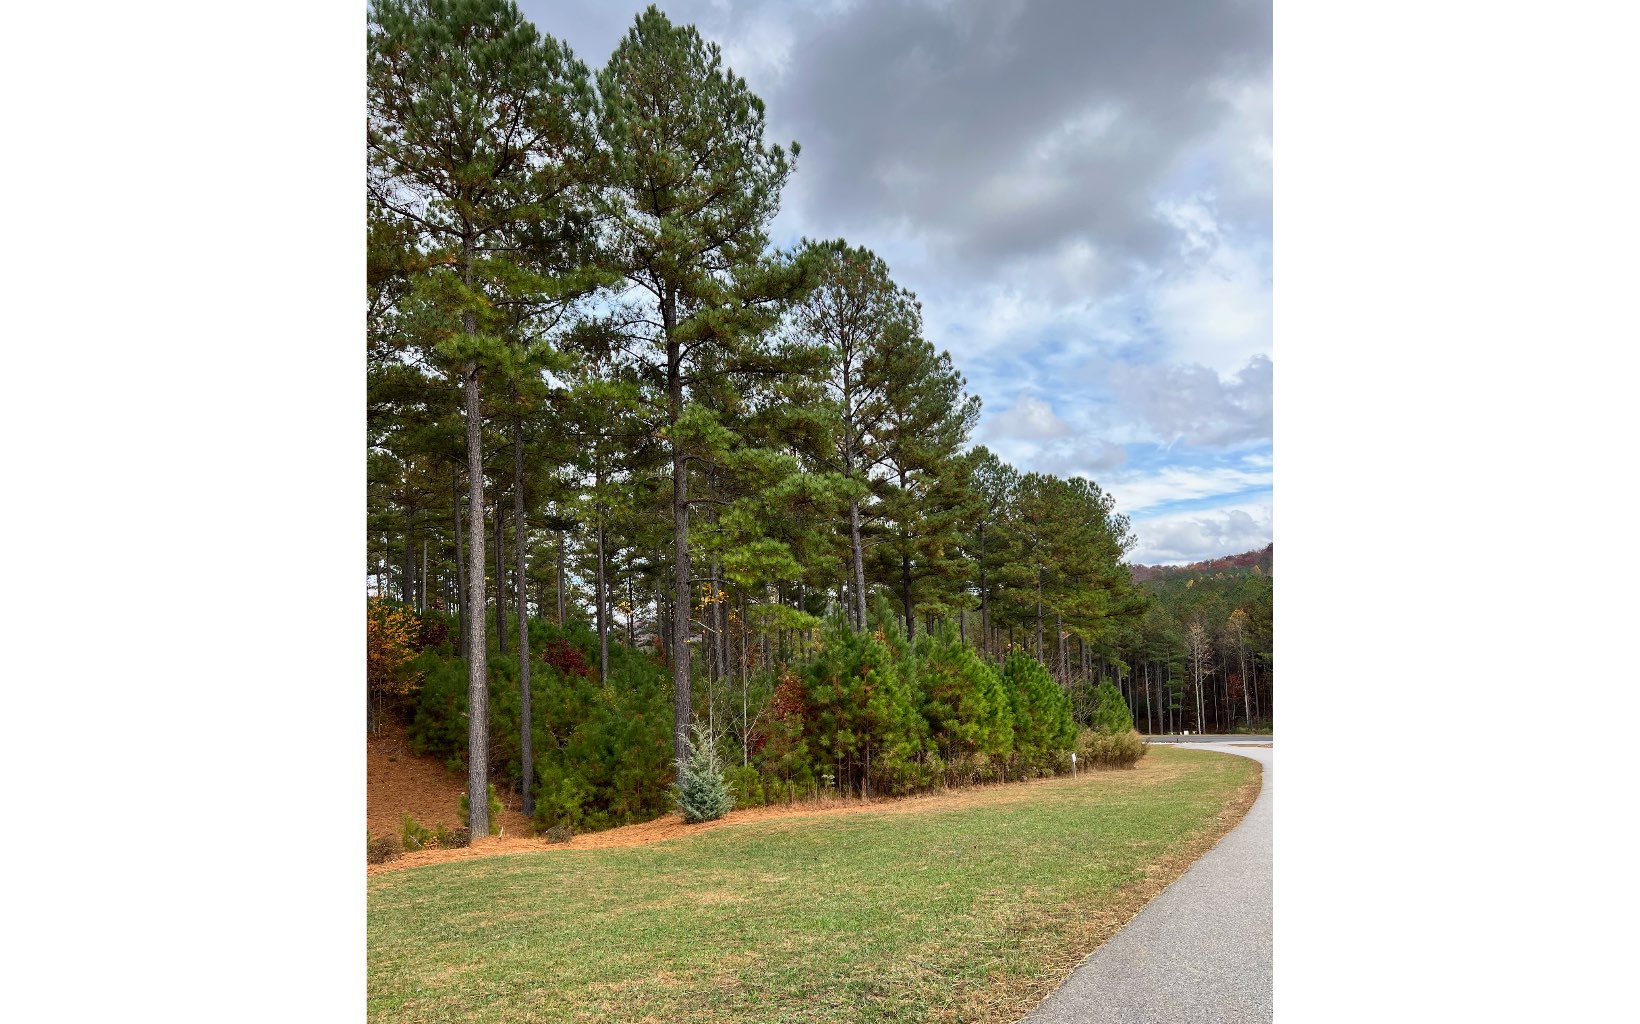 Looking for a great building lot in one of North Georgia's most popular communities? Look no further than Lot 136 in Thirteen Hundred. An amenity filled community with lake access, community pool & club house, walking trails, stables & more. All paved roads, Notla water, fiber optic. Gorgeous scenery abounds at this nice laying building lot in Thirteen Hundred